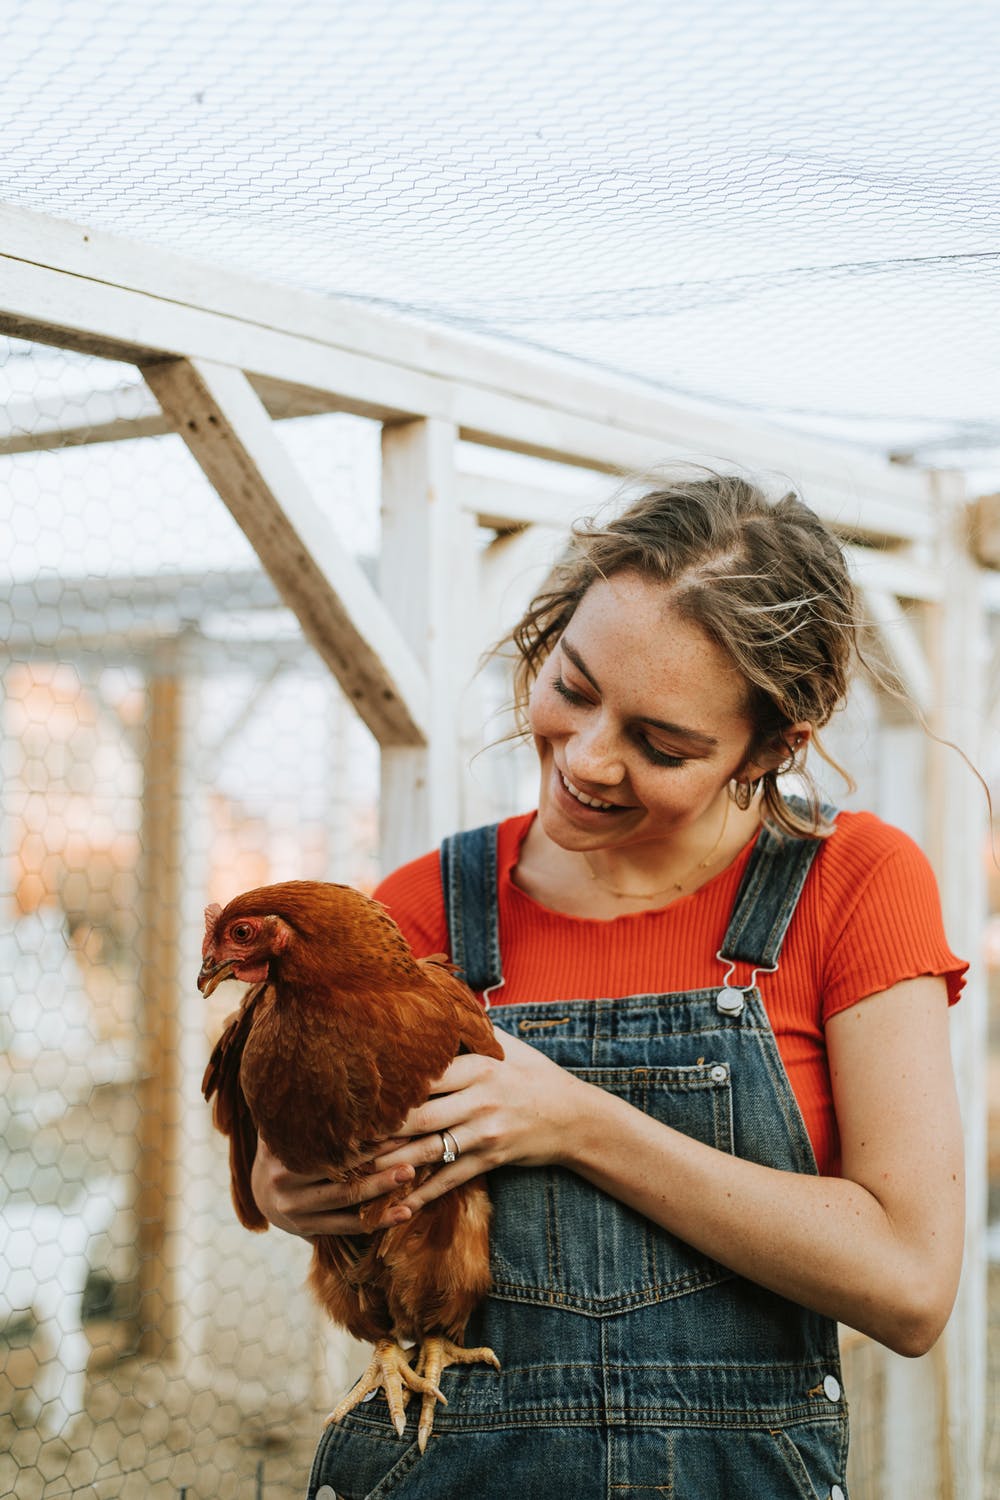 How difficult is to build a backyard chicken coop